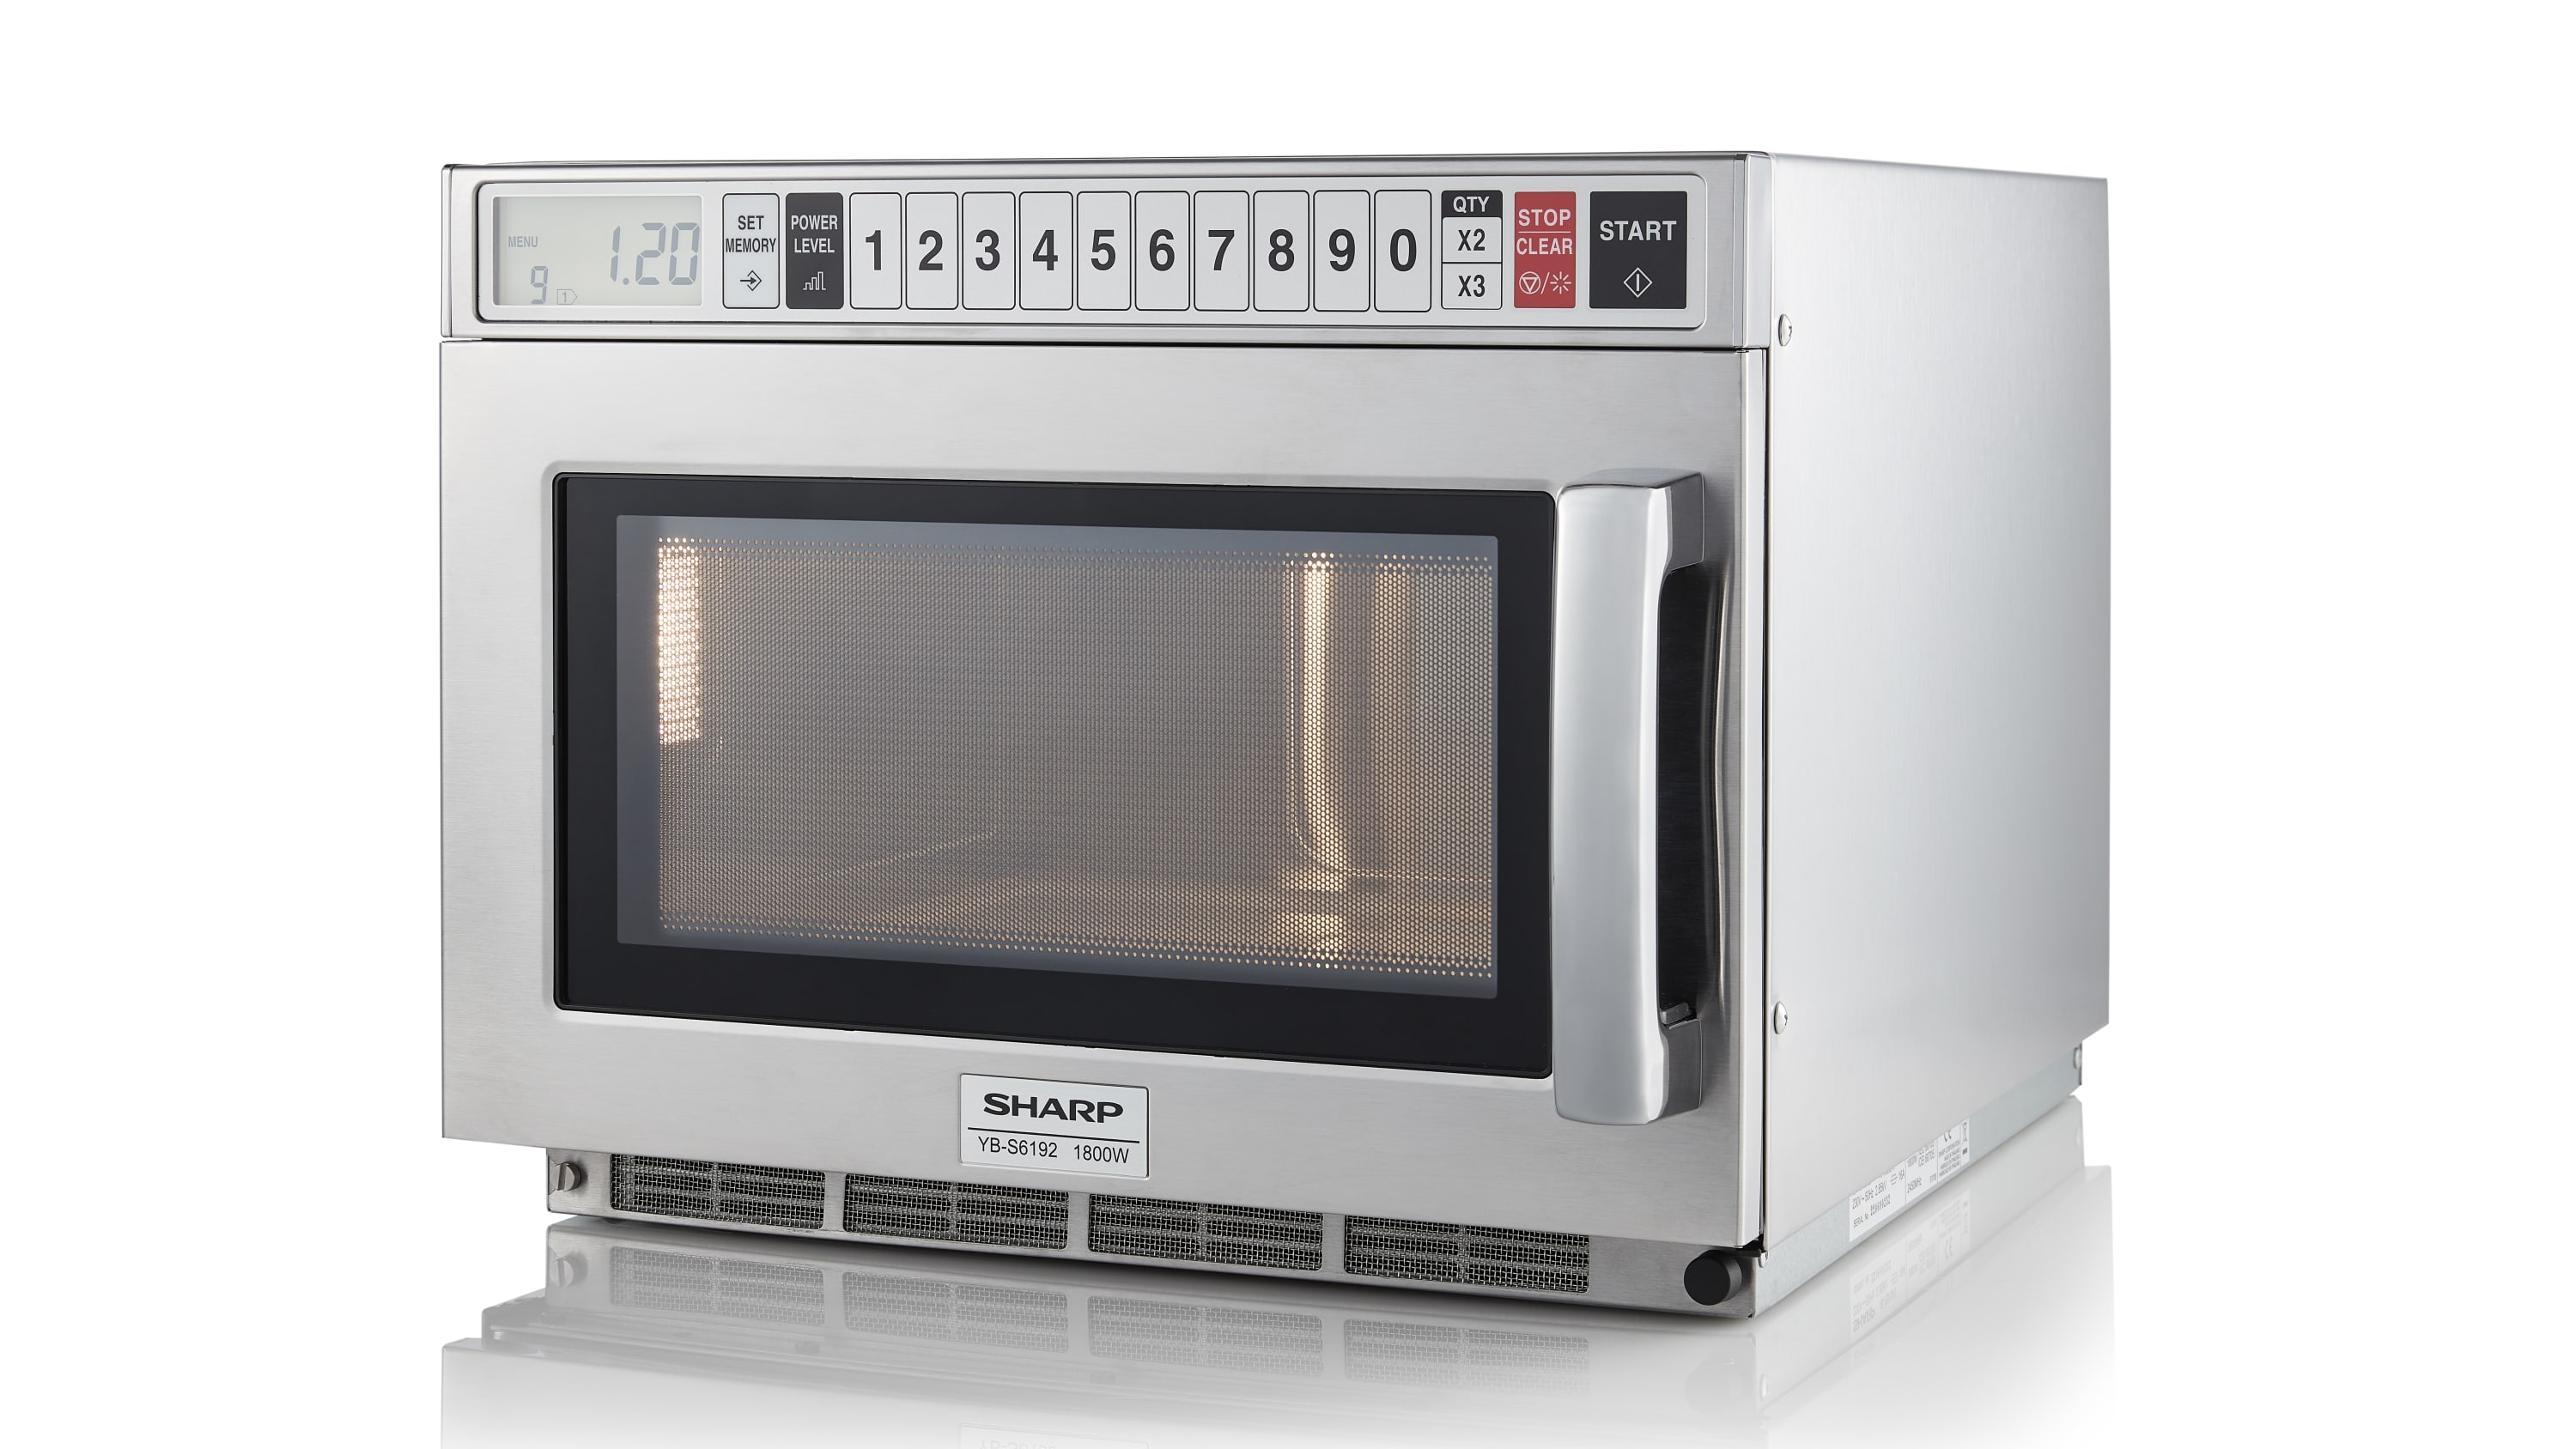 19L Professional Inverter Microwave Oven - 